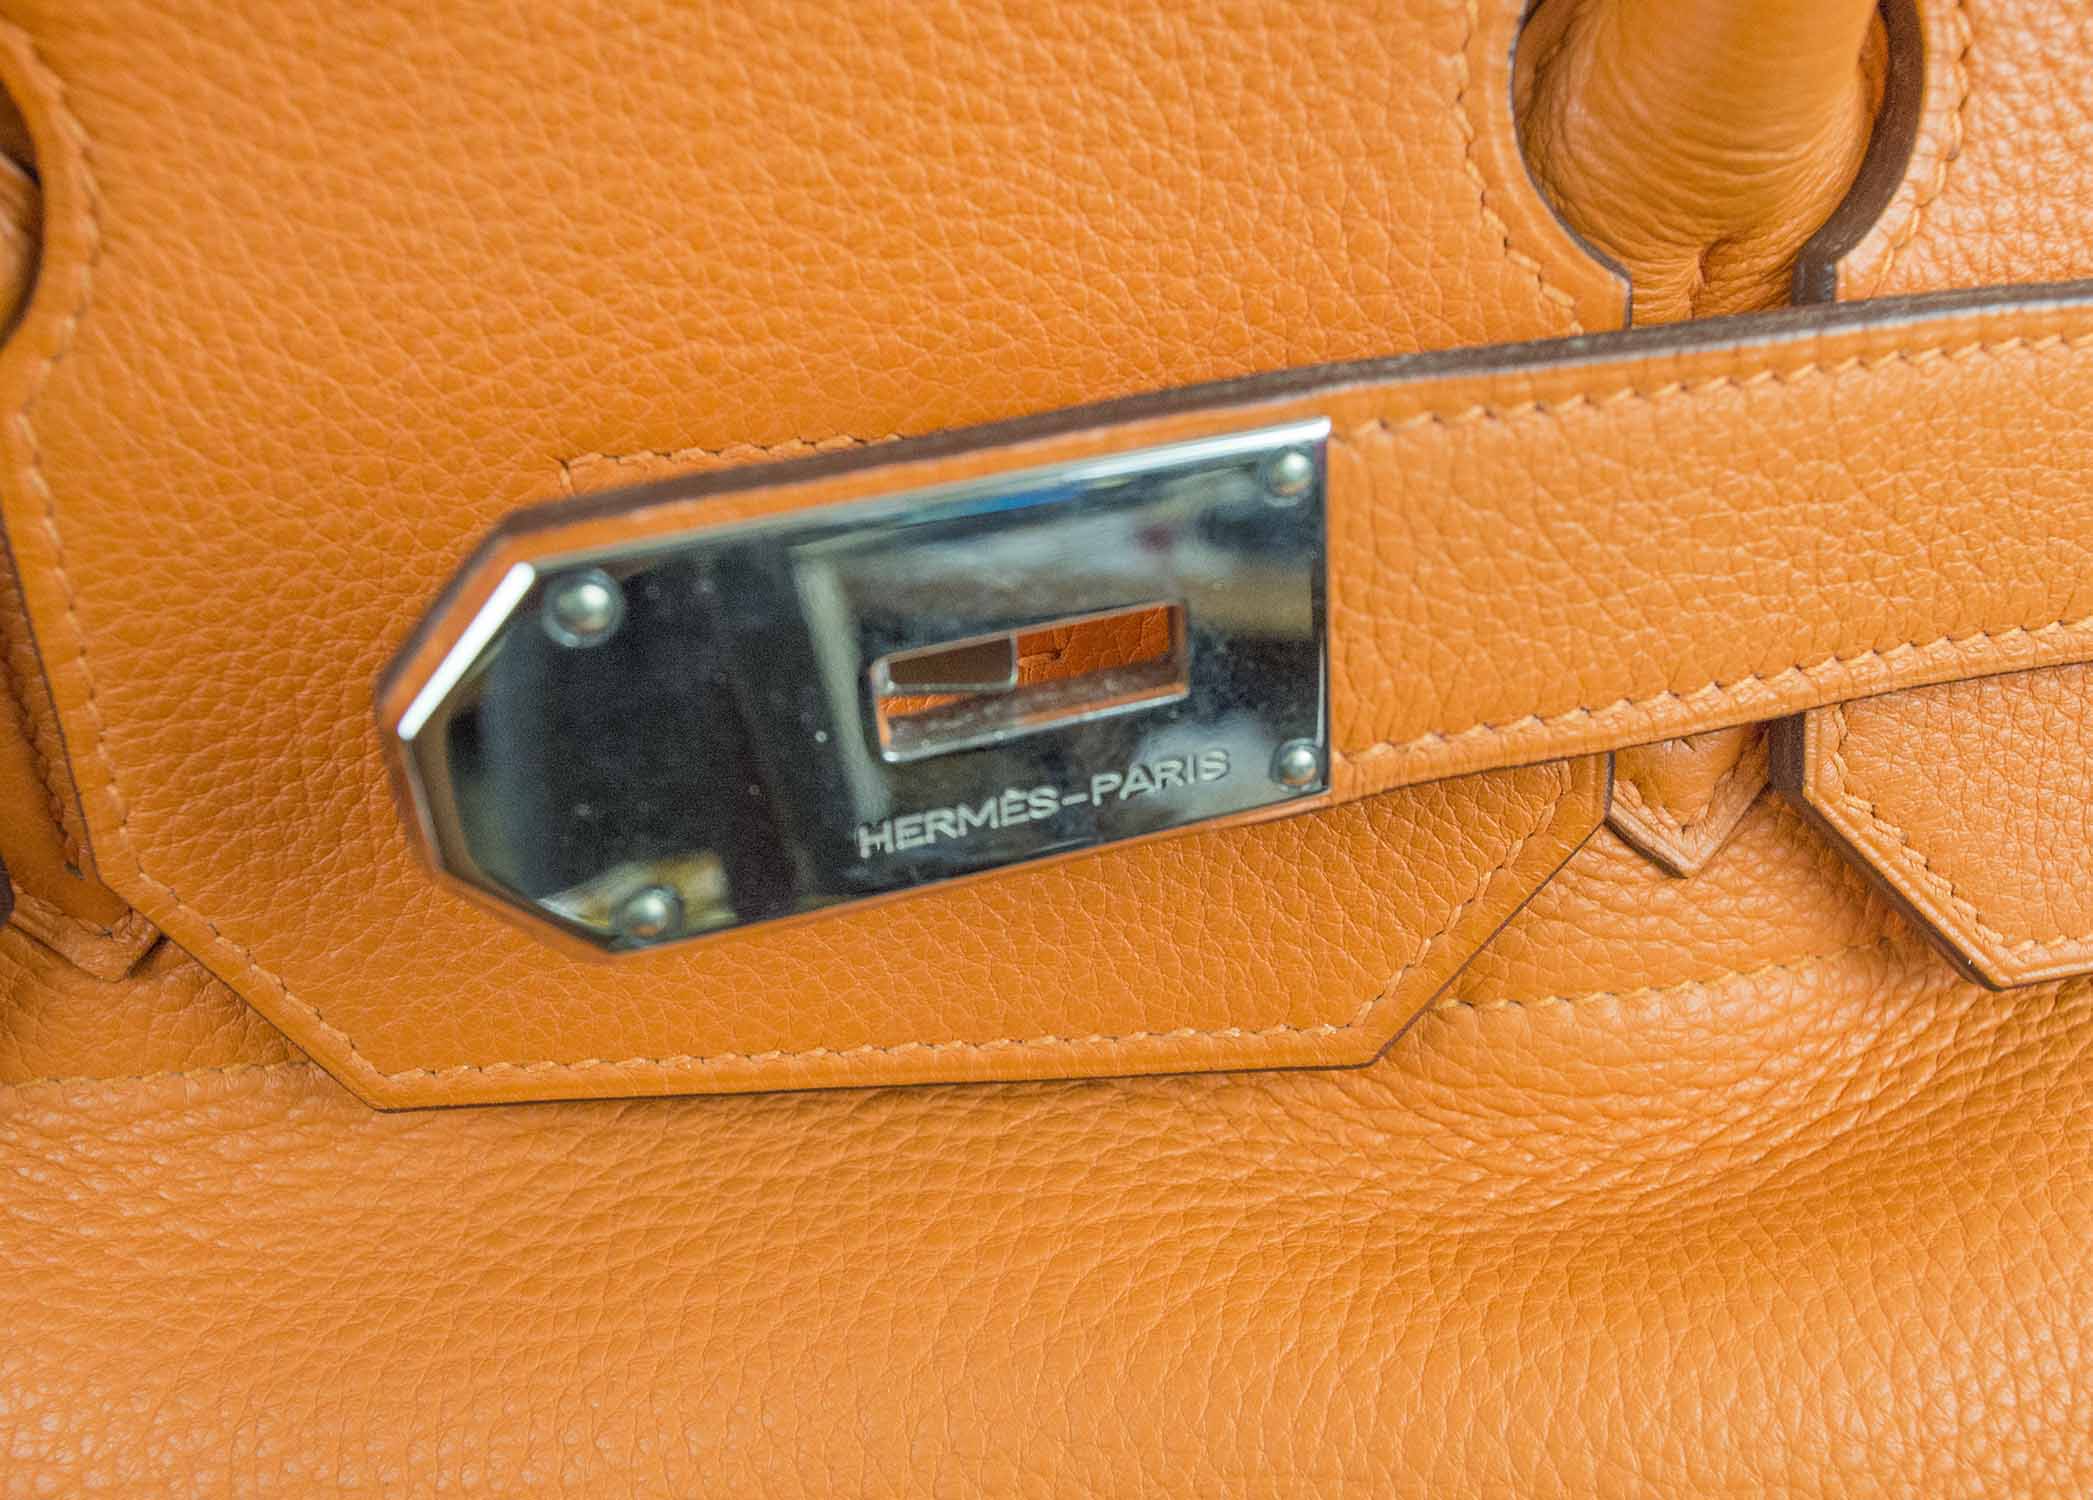 The Best Hermès Bags To Invest In: Birkin, Haut à Courroies And More